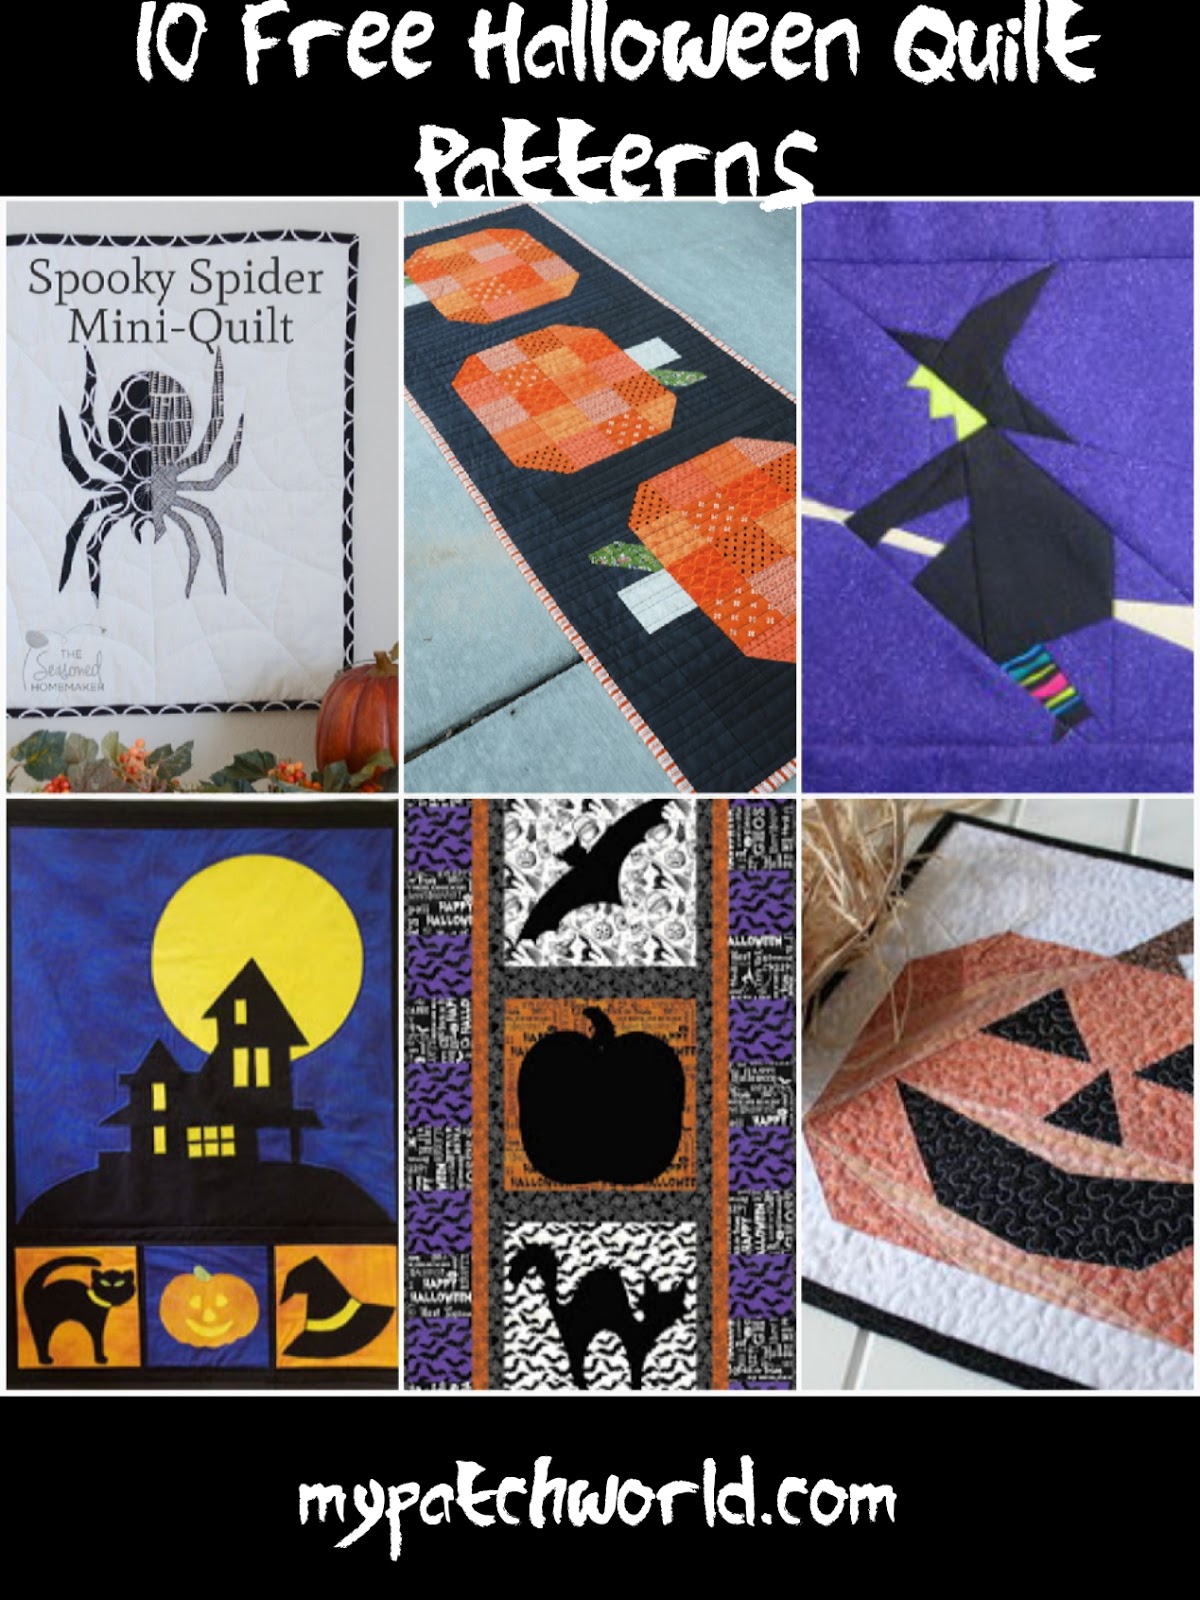 10 free halloween quilt patterns | All about patchwork and quilting